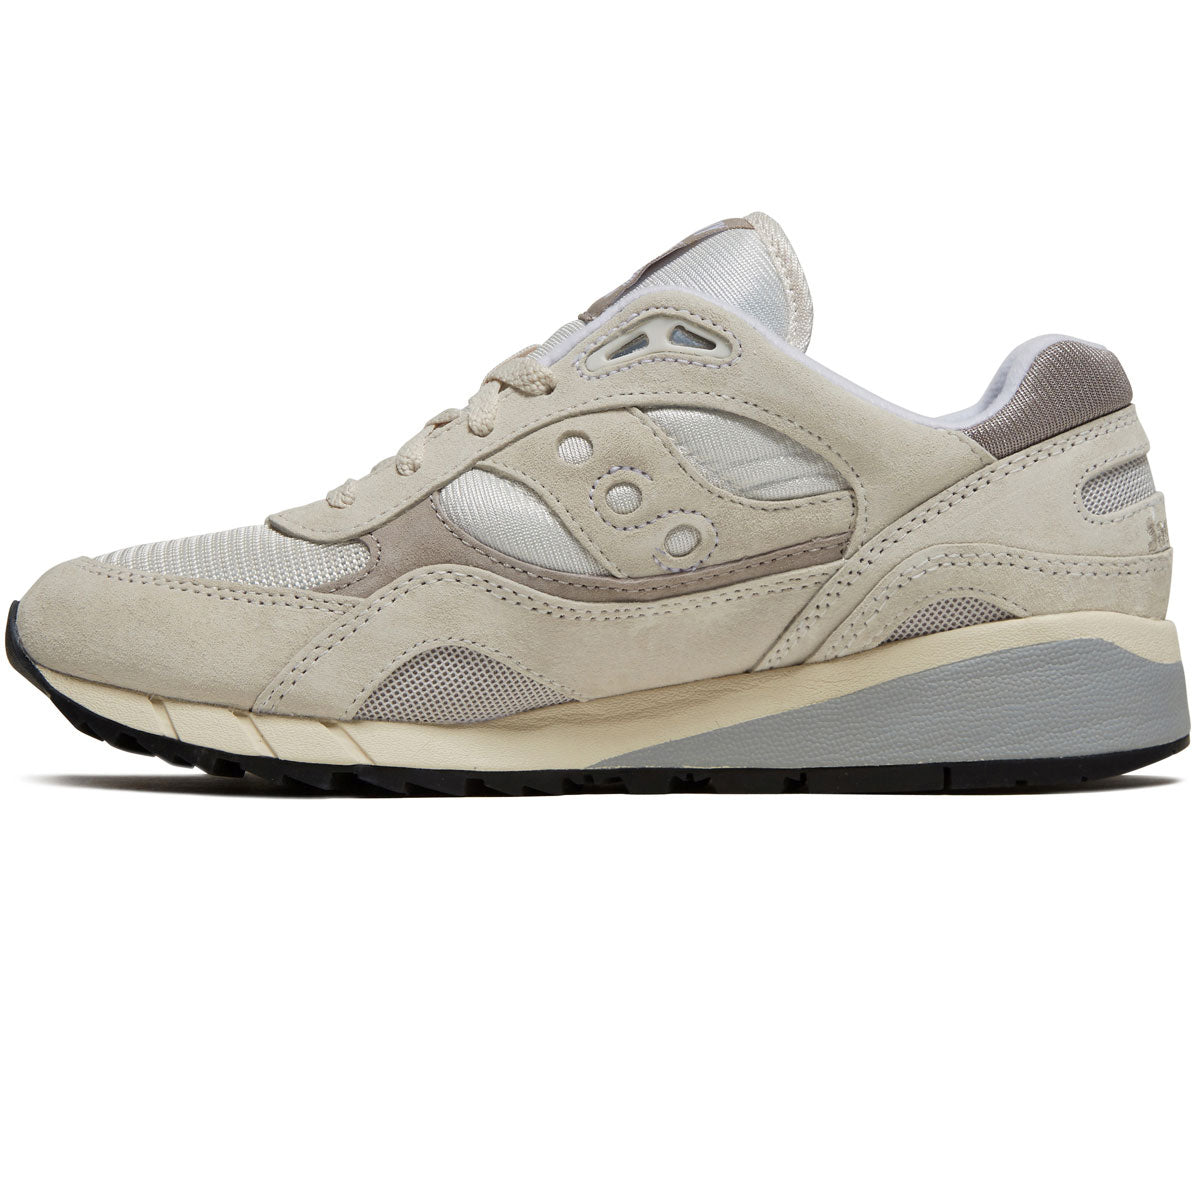 Saucony Shadow 6000 Shoes - White/Grey image 2